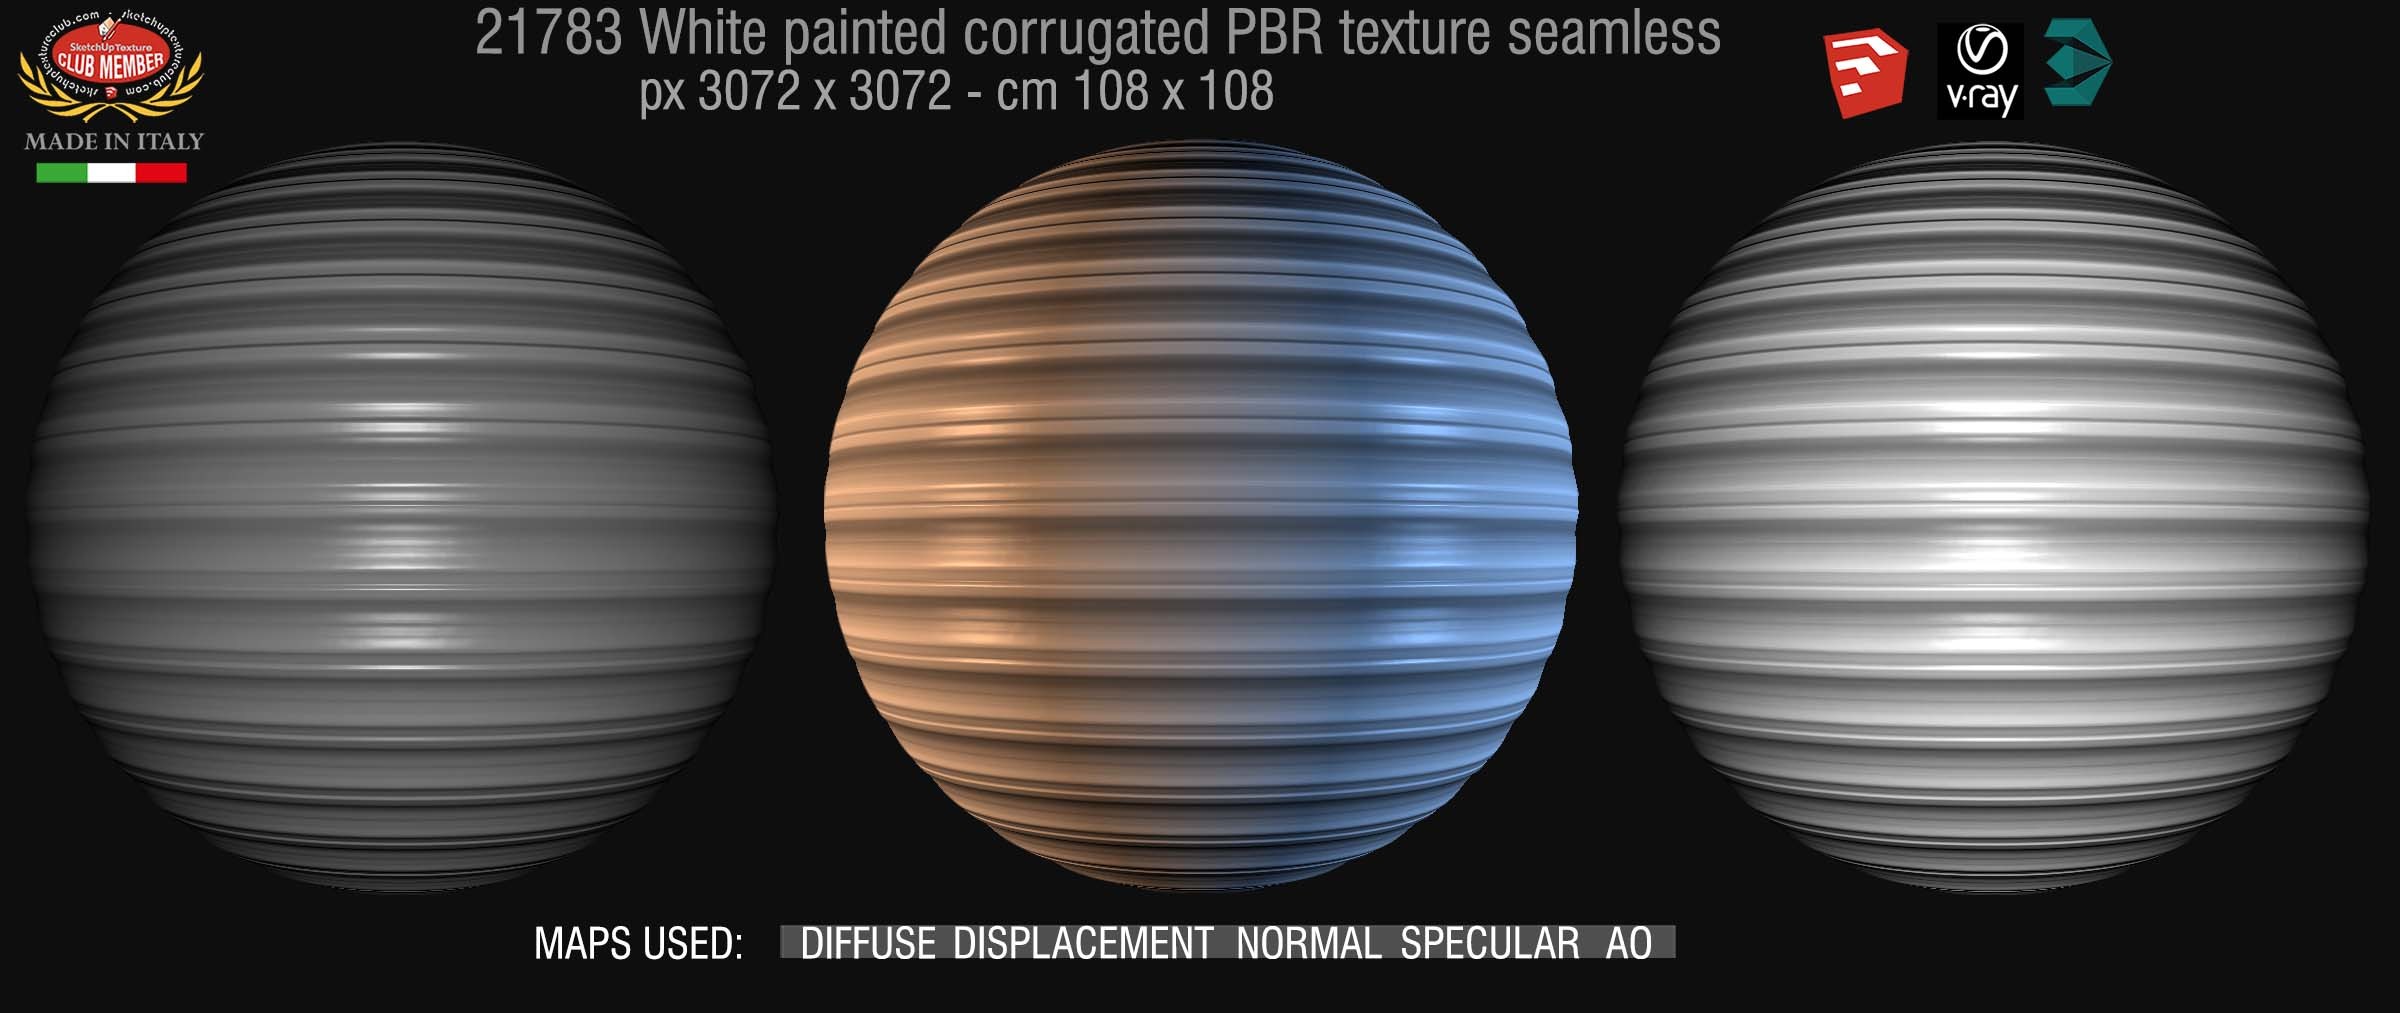 21783 White painted corrugated metal PBR texture seamless DEMO